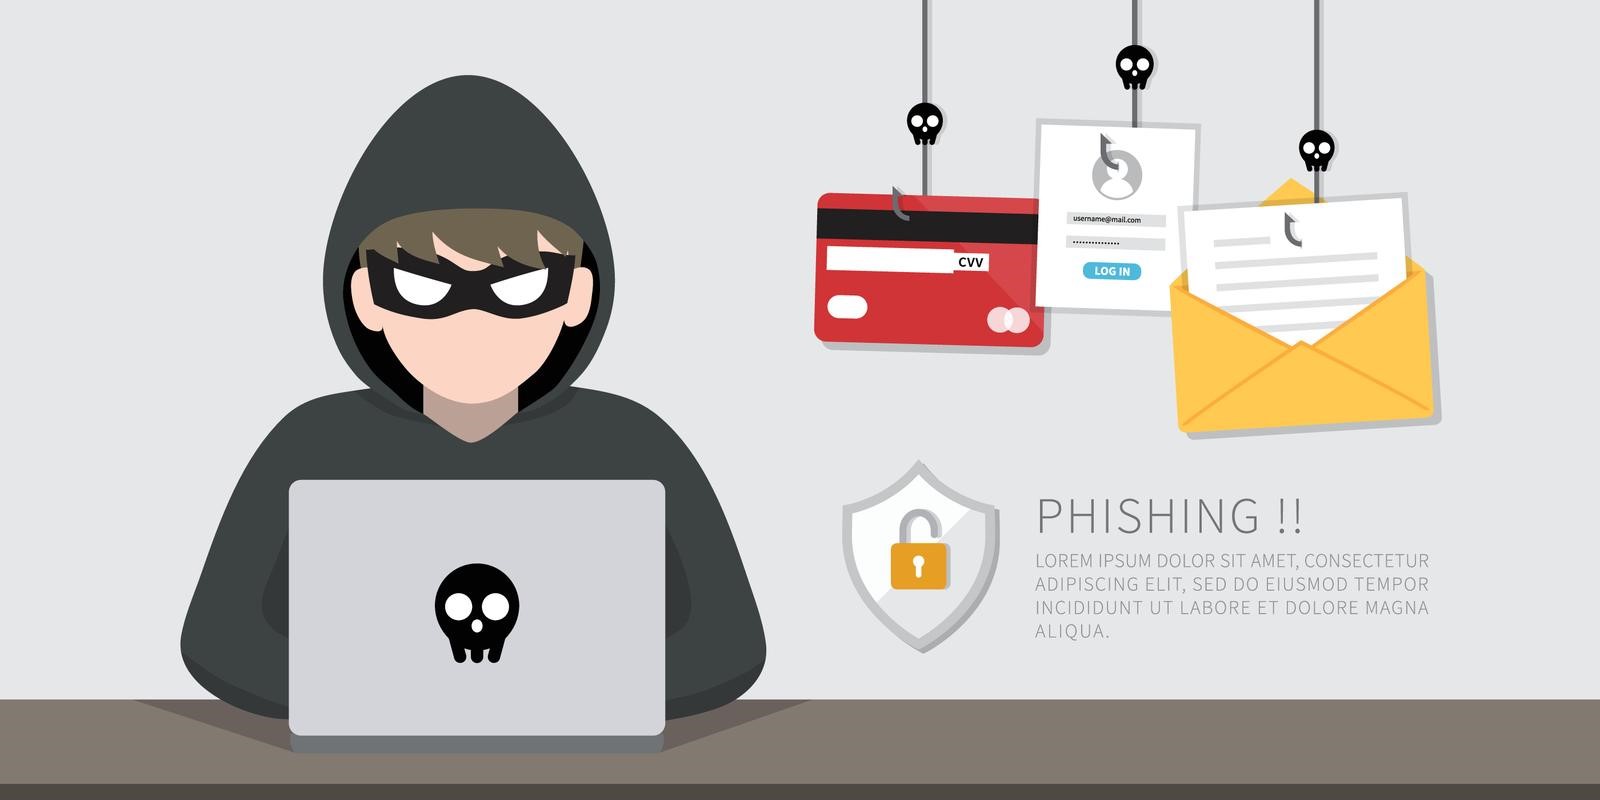 Why Are Phishing Scams Becoming More Dangerous?